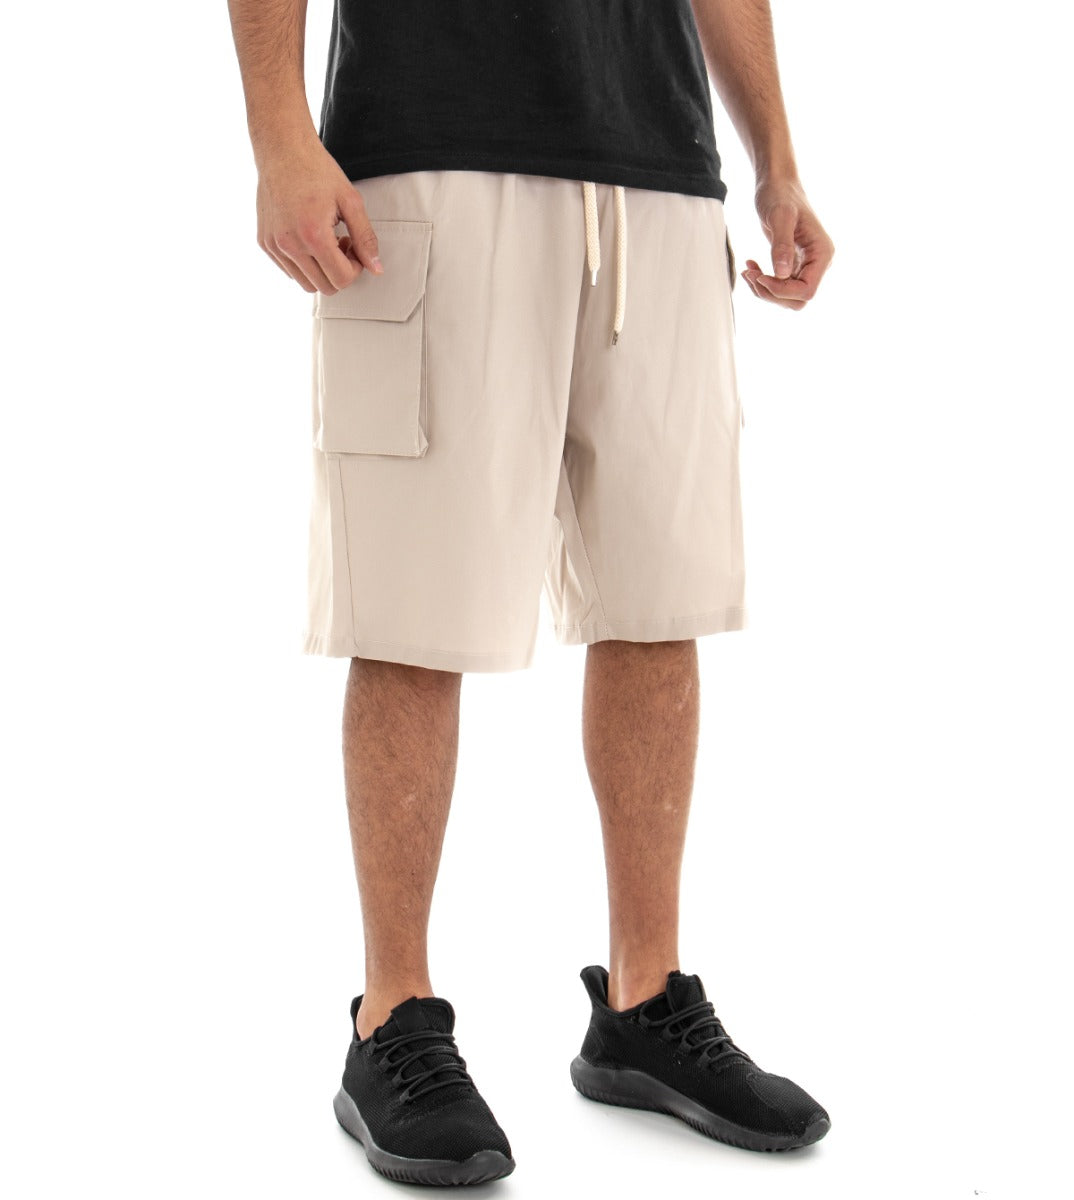 Beige Men's Bermuda Shorts with Low Elastic Crotch GIOSAL-PC1347A